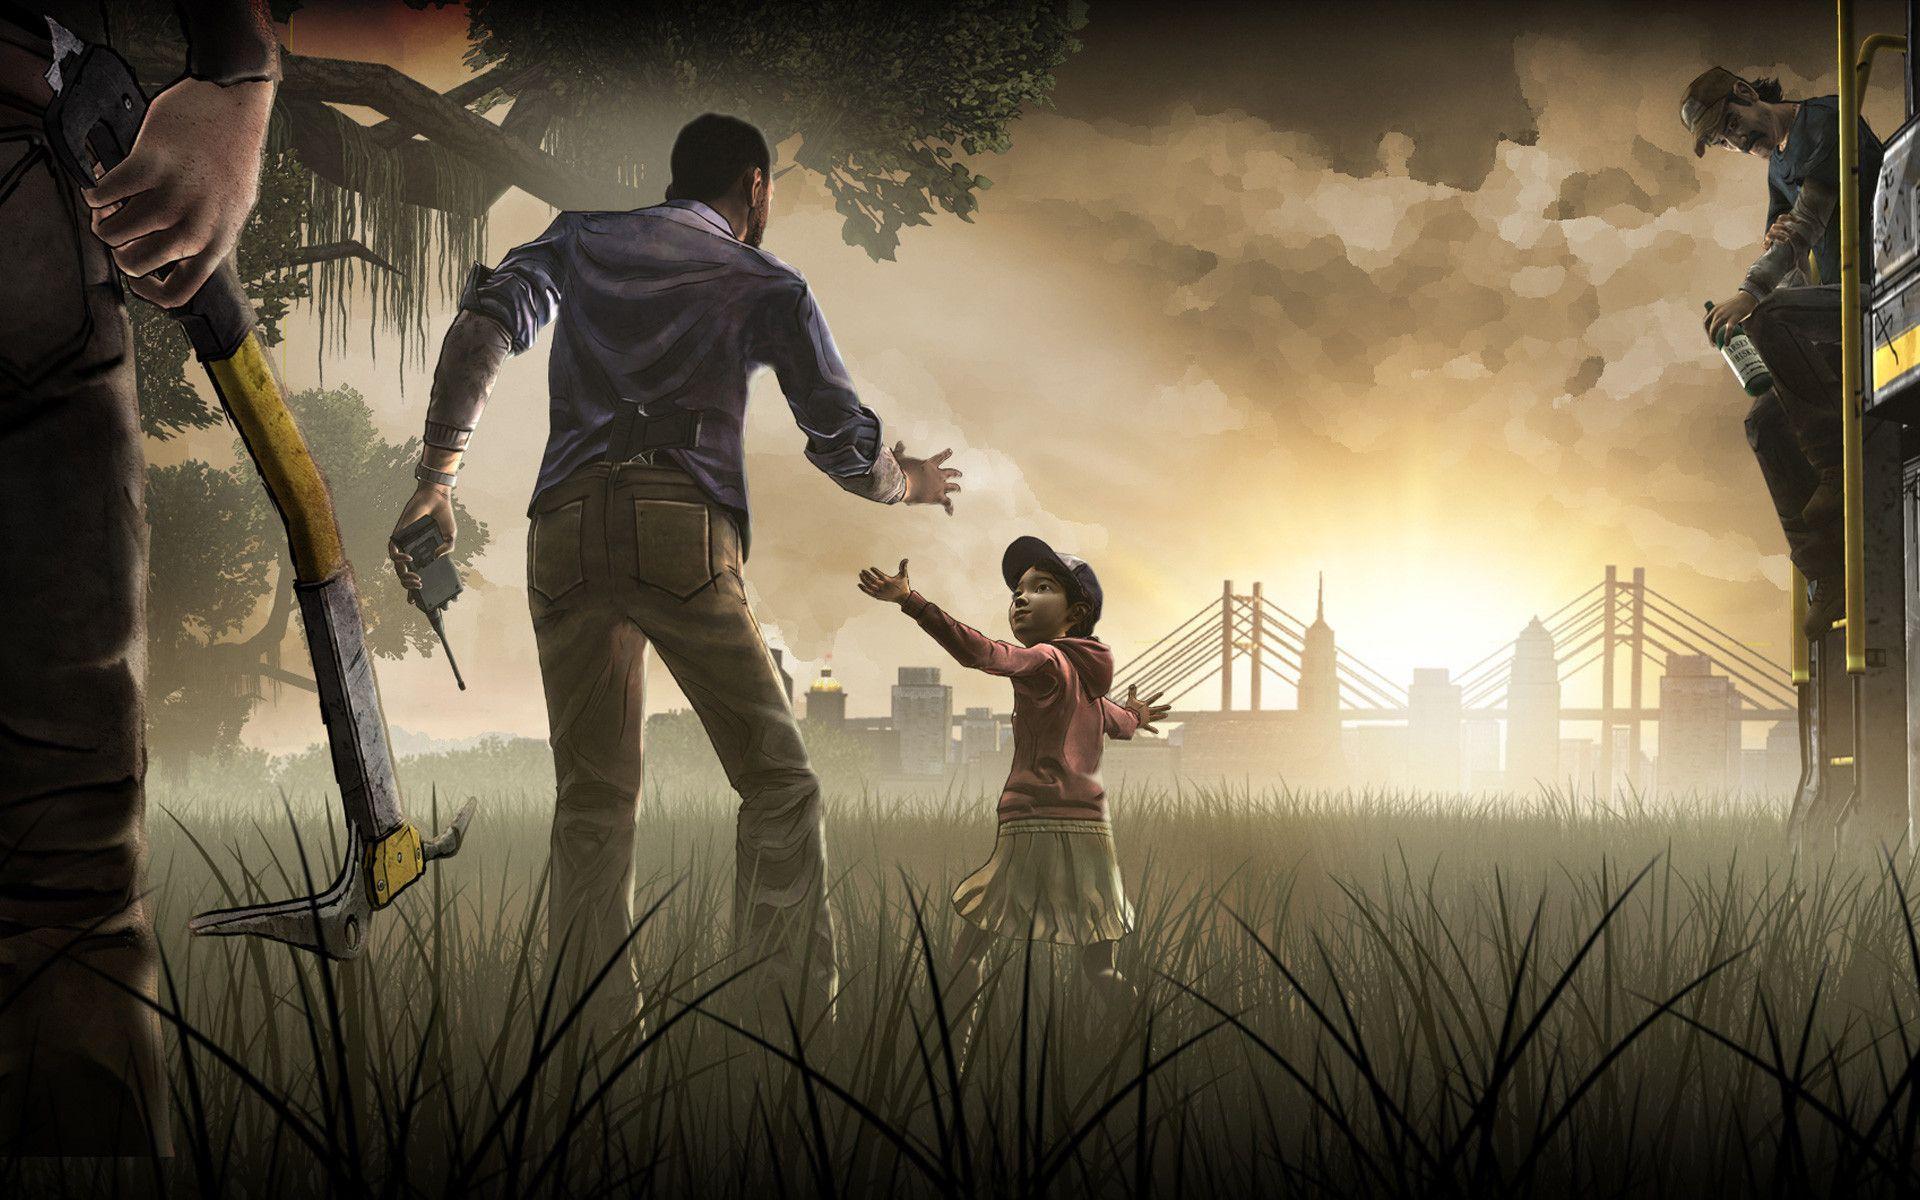 1920 x 1200 · jpeg - The Walking Dead Game Wallpapers - Wallpaper Cave